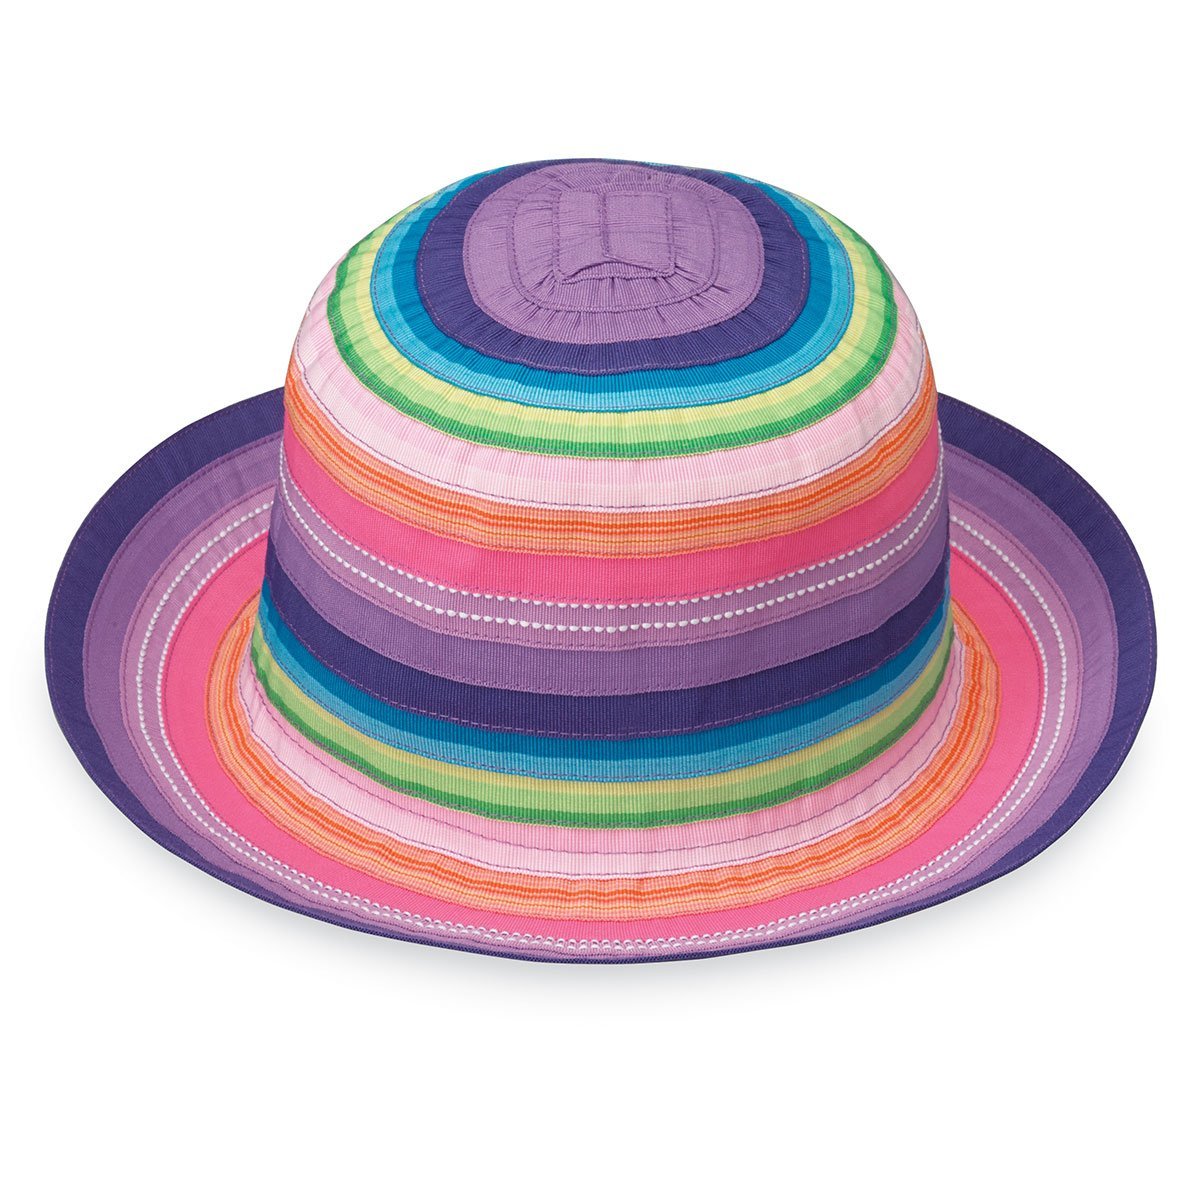 Featuring Front of Kid's Packable Wide Brim Style Petite Nantucket UPF Sun Hat in Rainbow Tones from Wallaroo